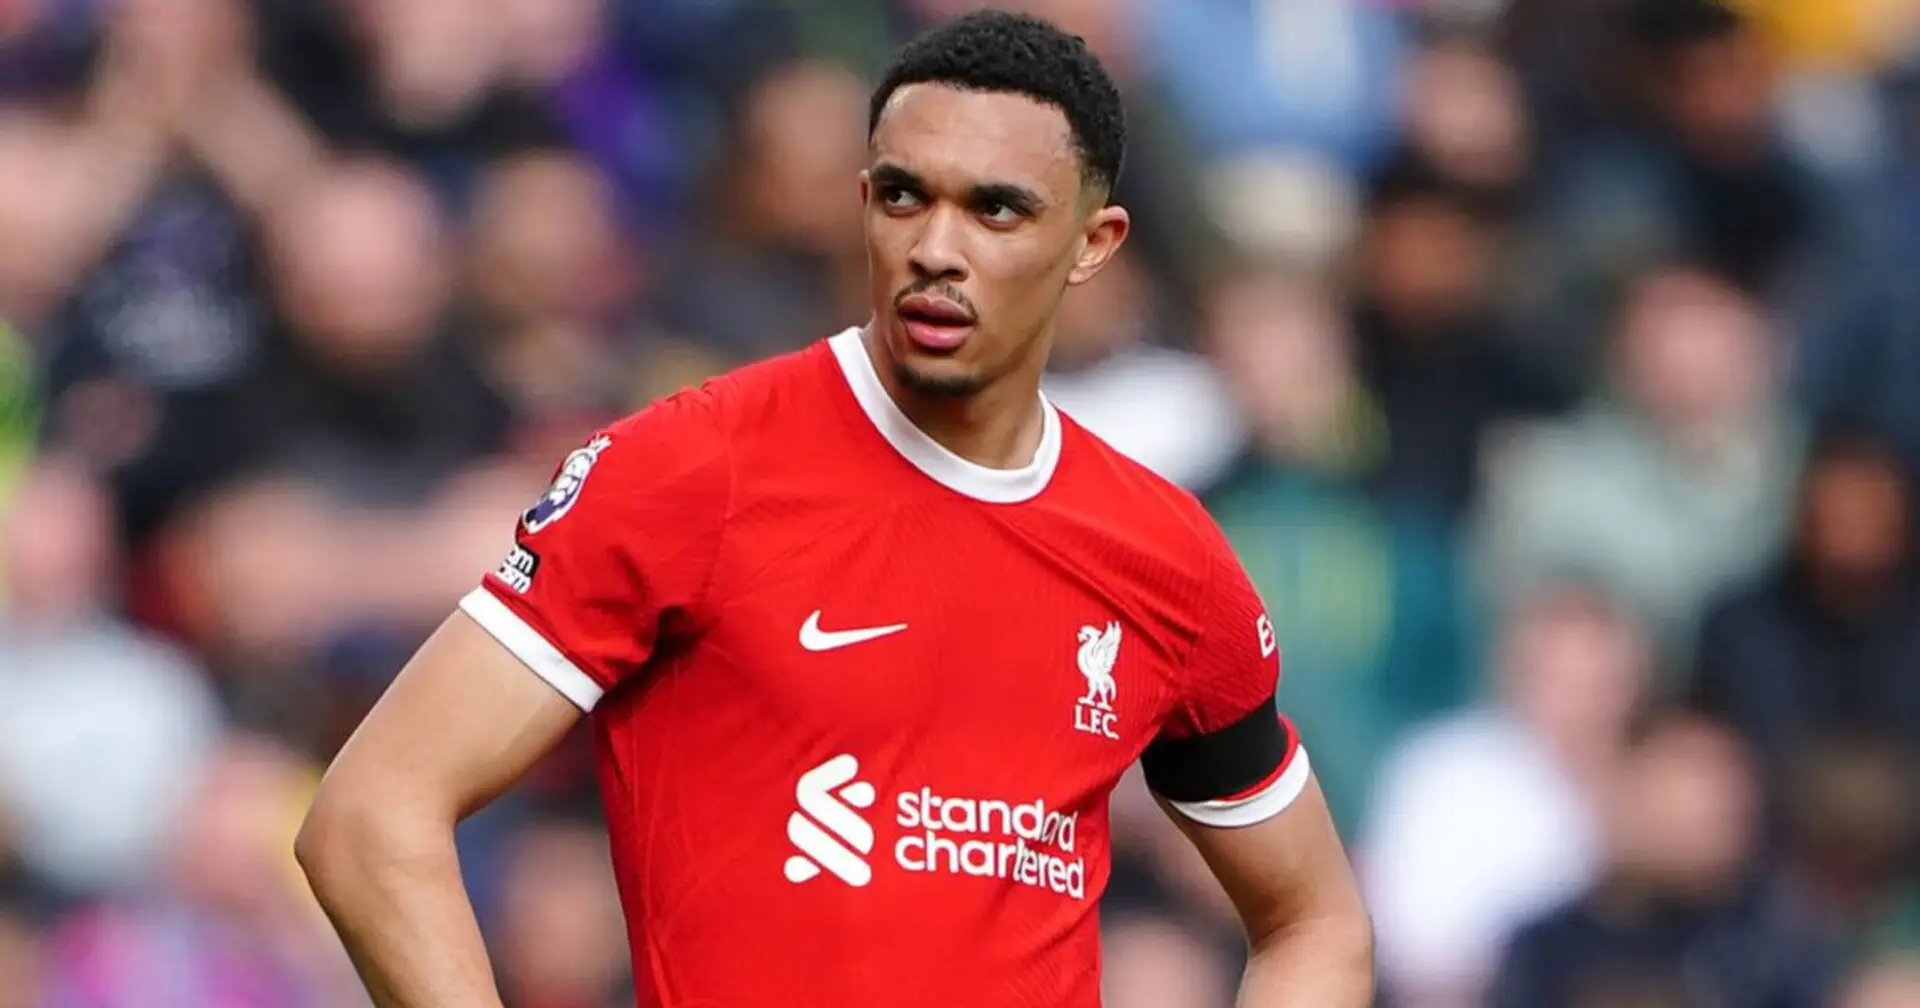 Trent worried about handing Premier League title to City & 2 more big stories you might've missed